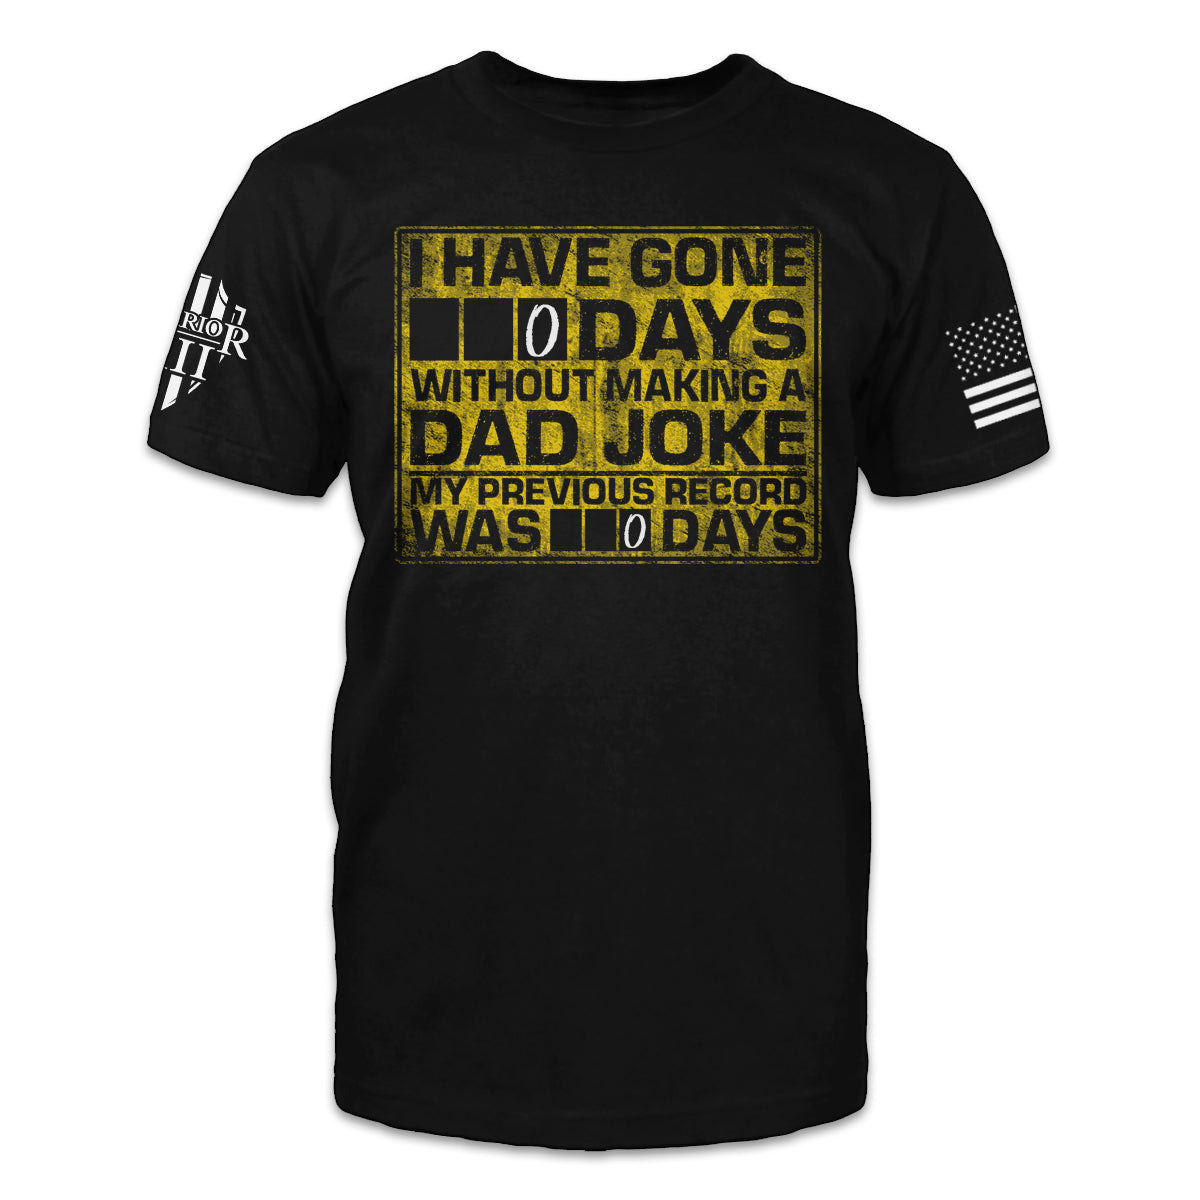 Black t-shirt with the words "I have gone zero days without making a Dad Joke. My previous record was 0 days" printed on the front.